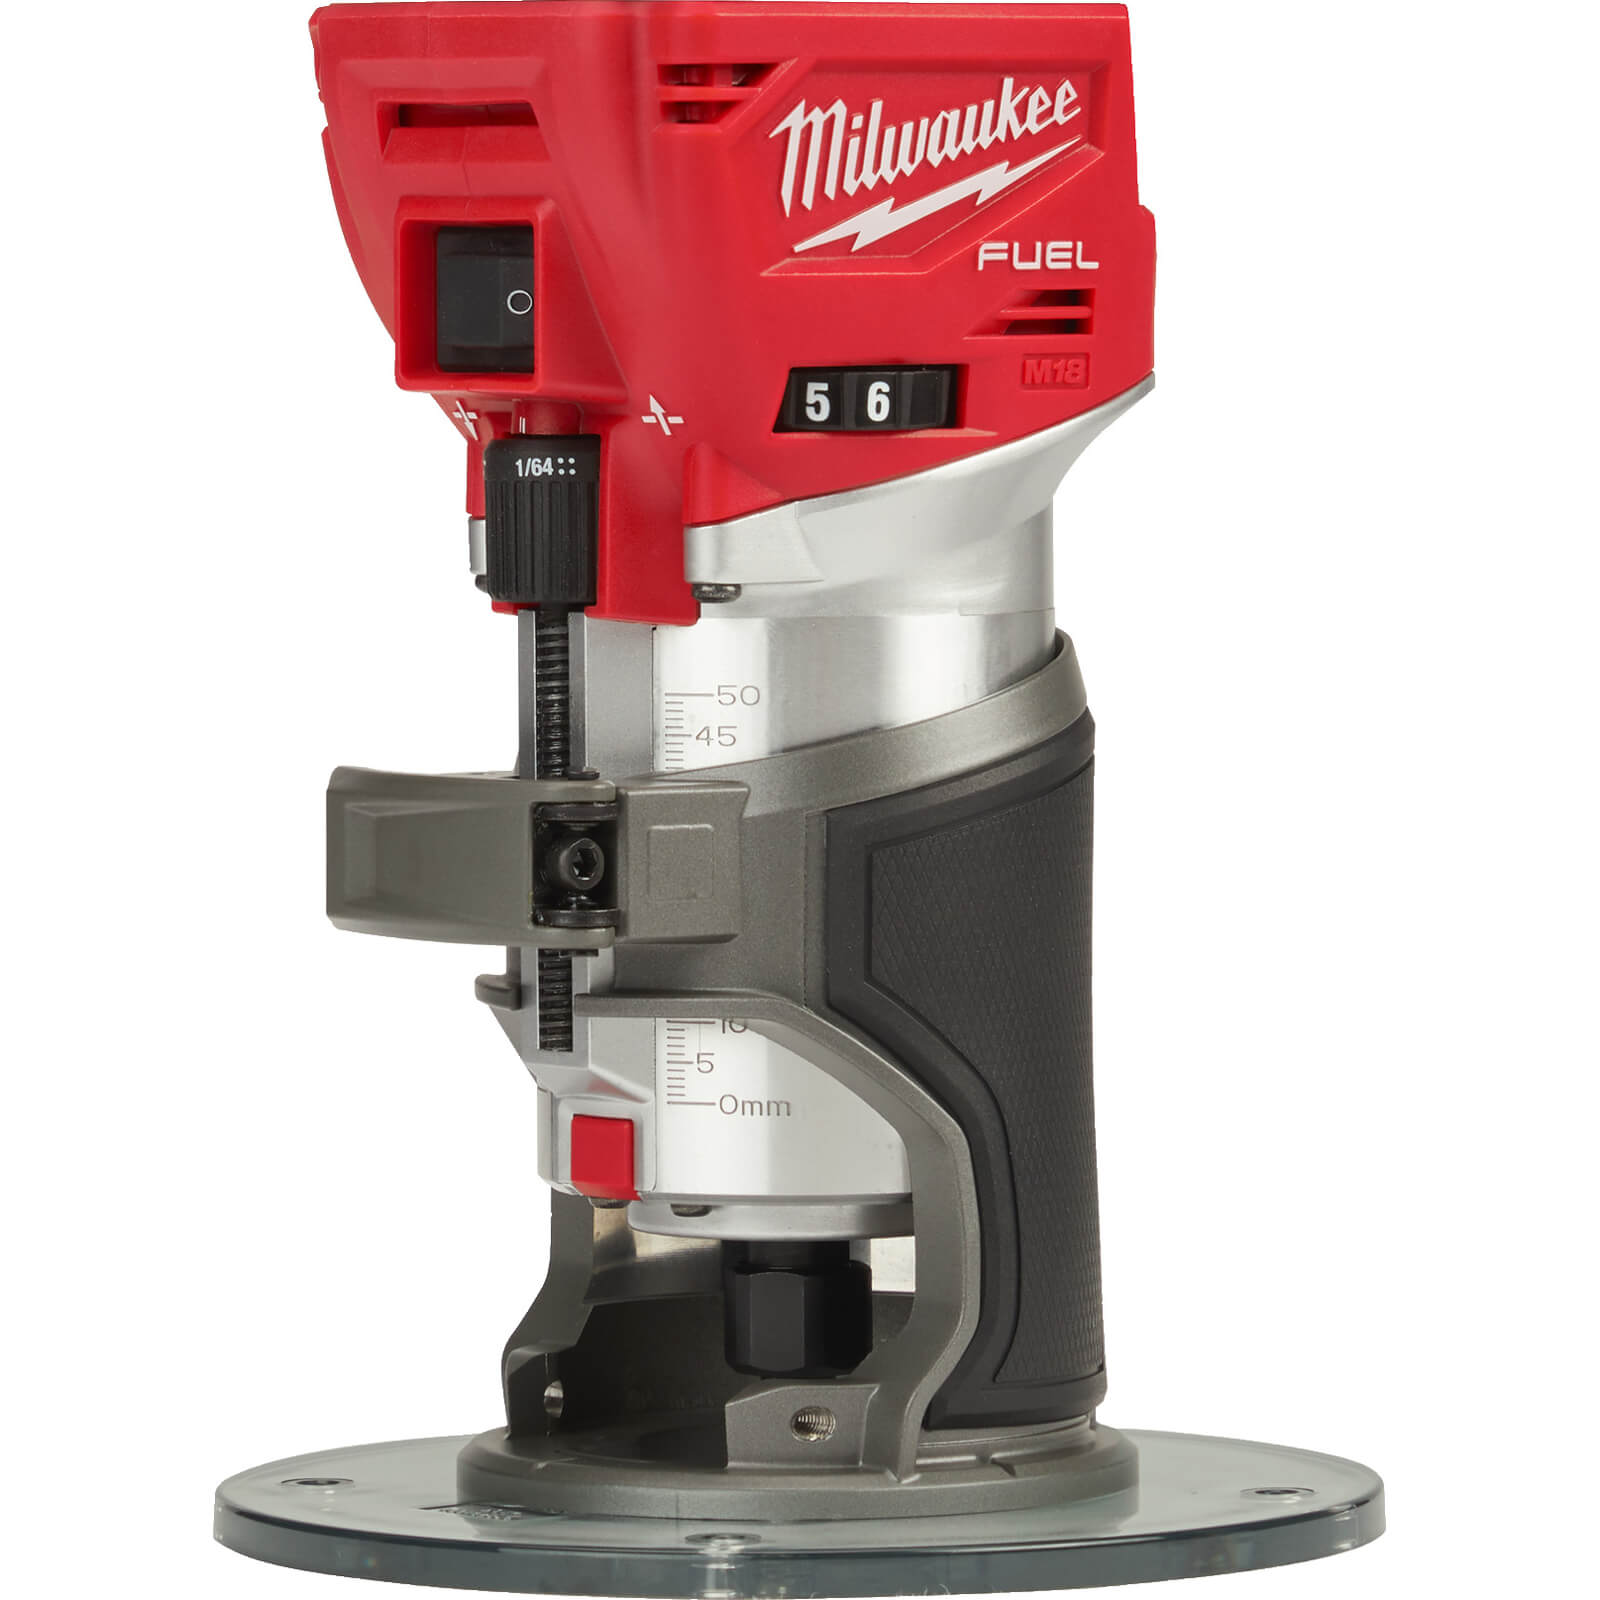 Image of Milwaukee M18 FTR Fuel 18v Cordless Brushless 1/4" Trim Router No Batteries No Charger Case